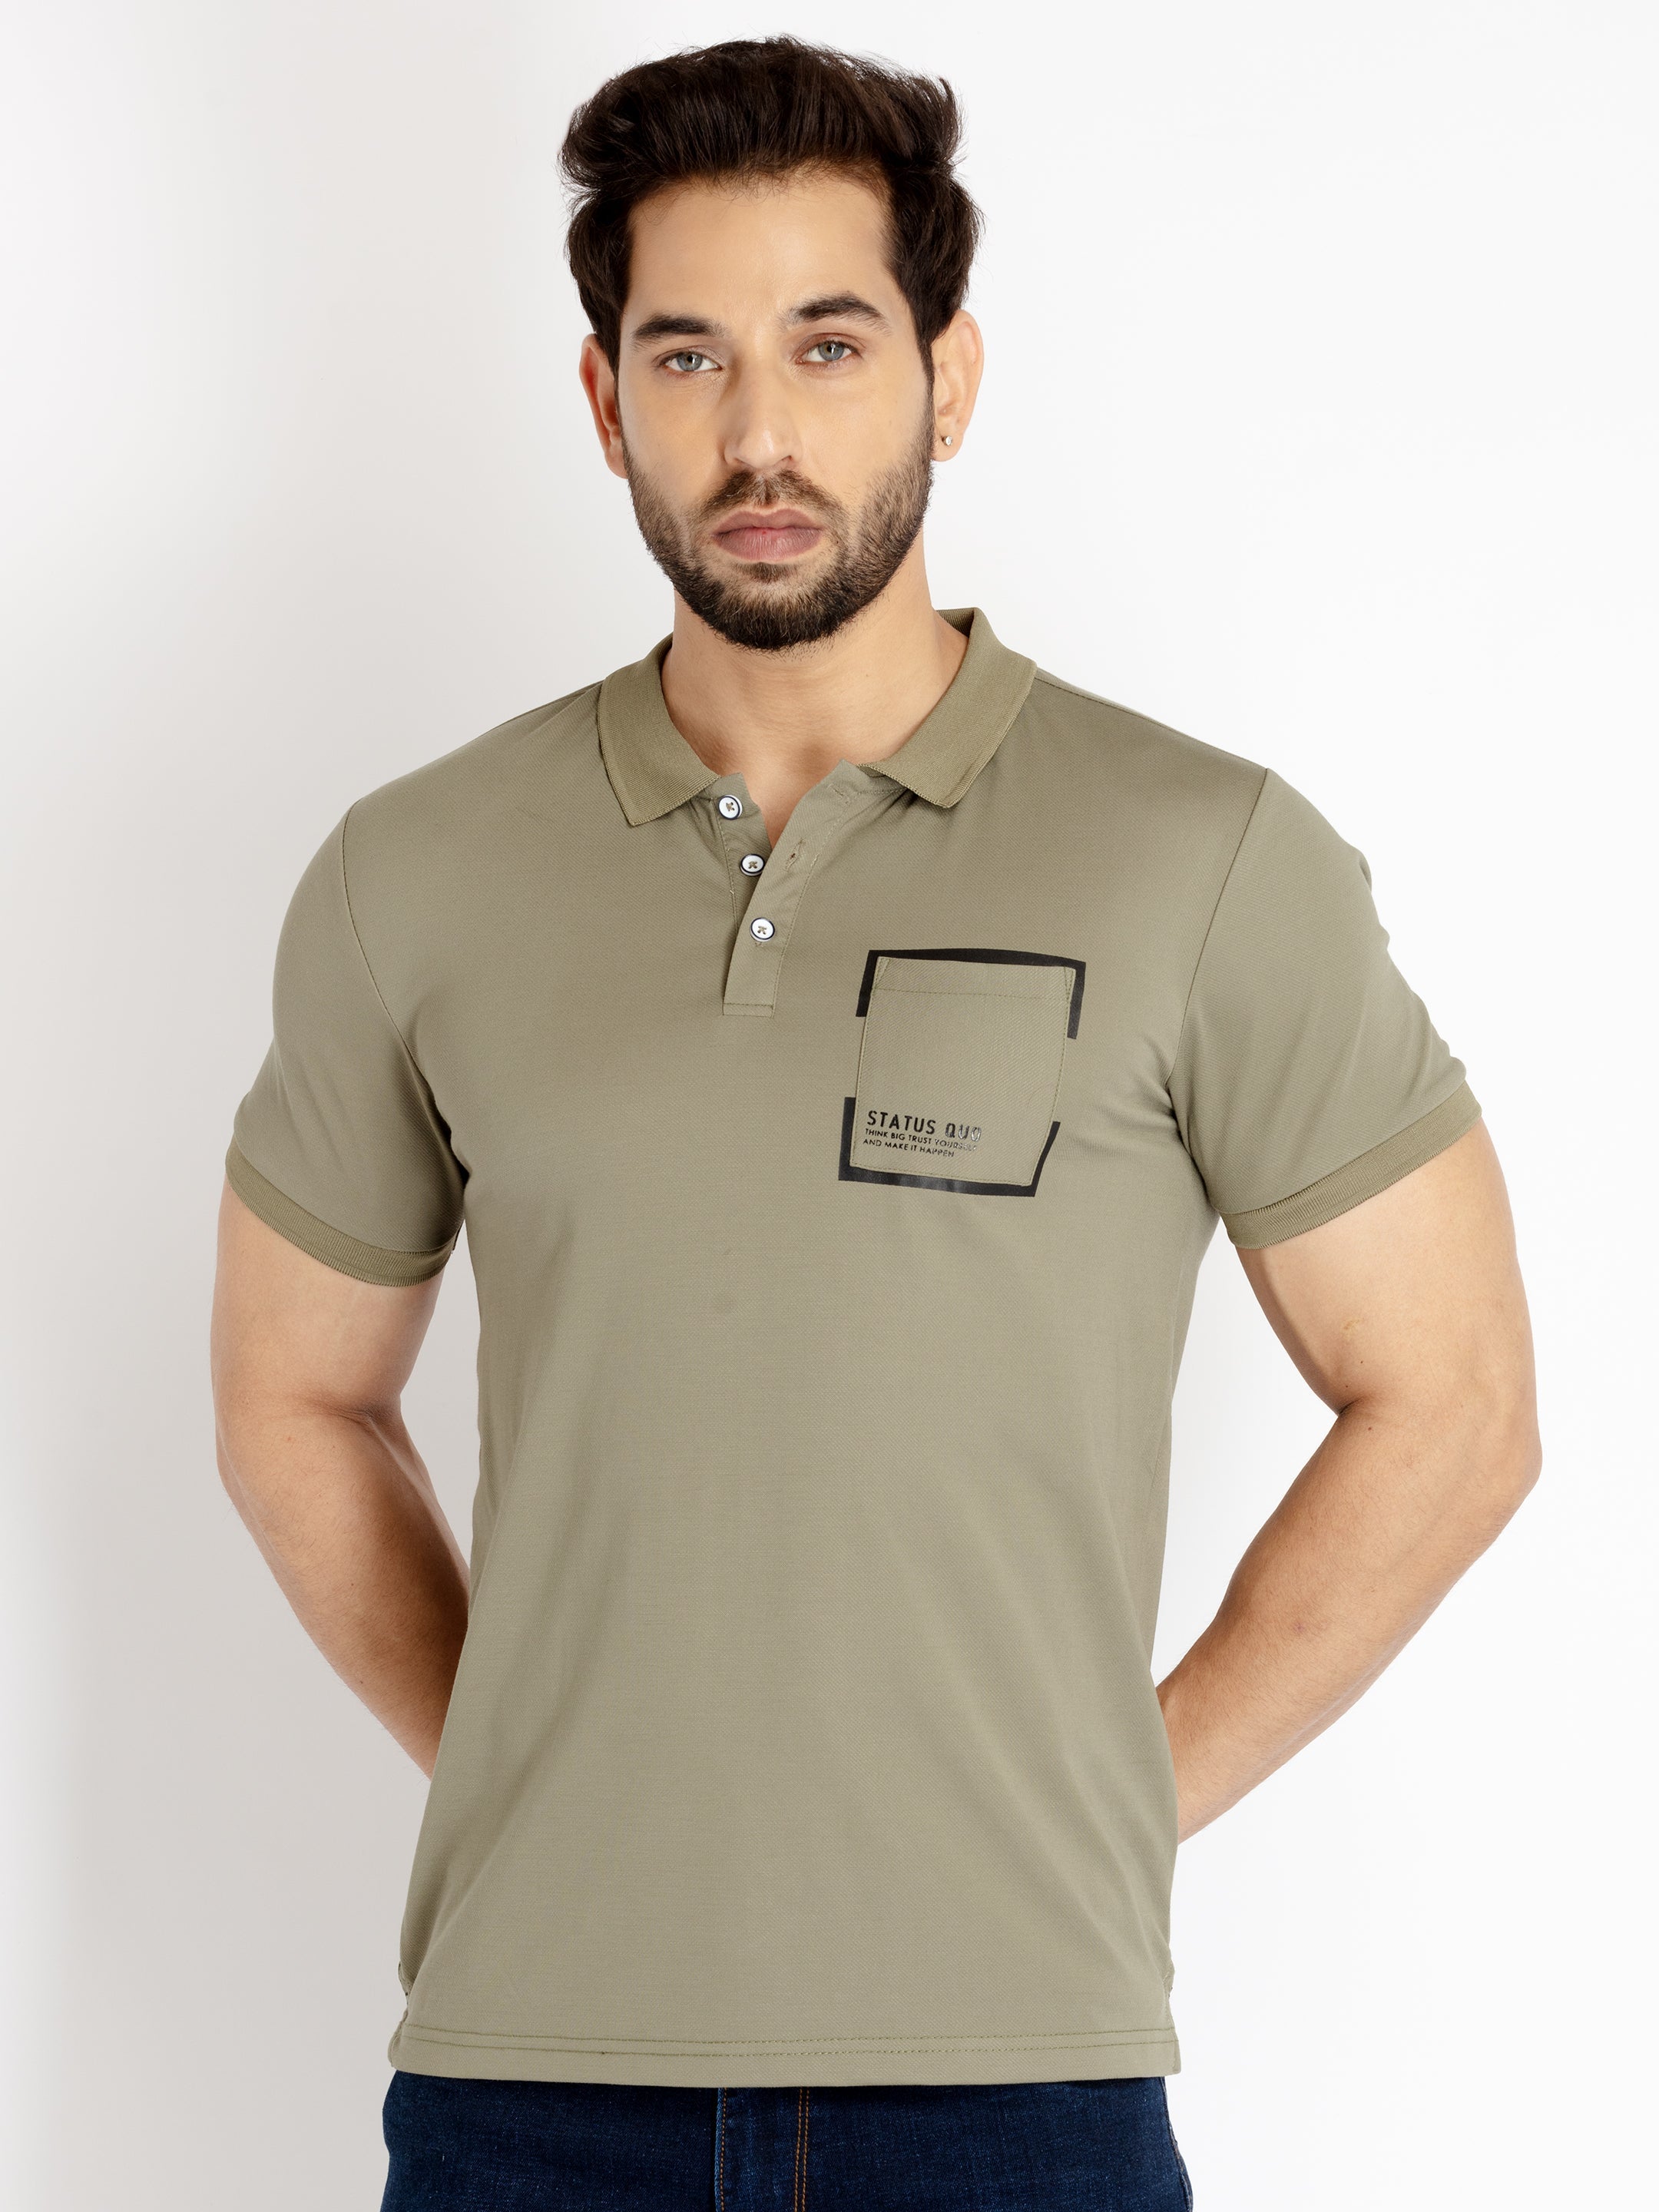 Solid polo t shirt